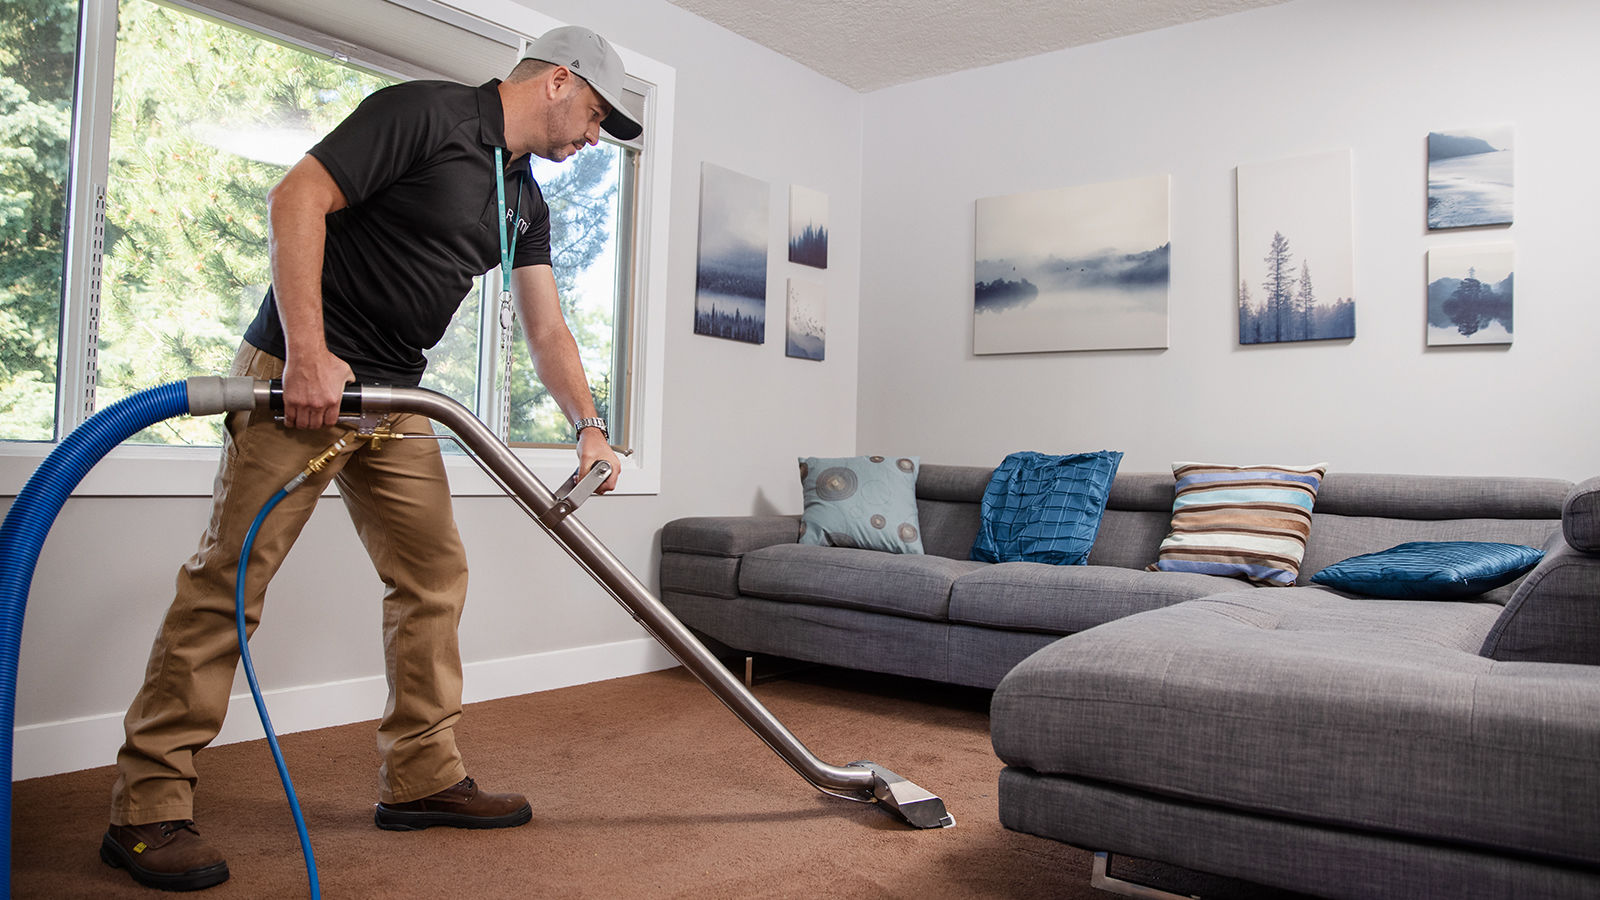 A Rümi technician using a vacuum cleaner to clean the carpet in a living room.